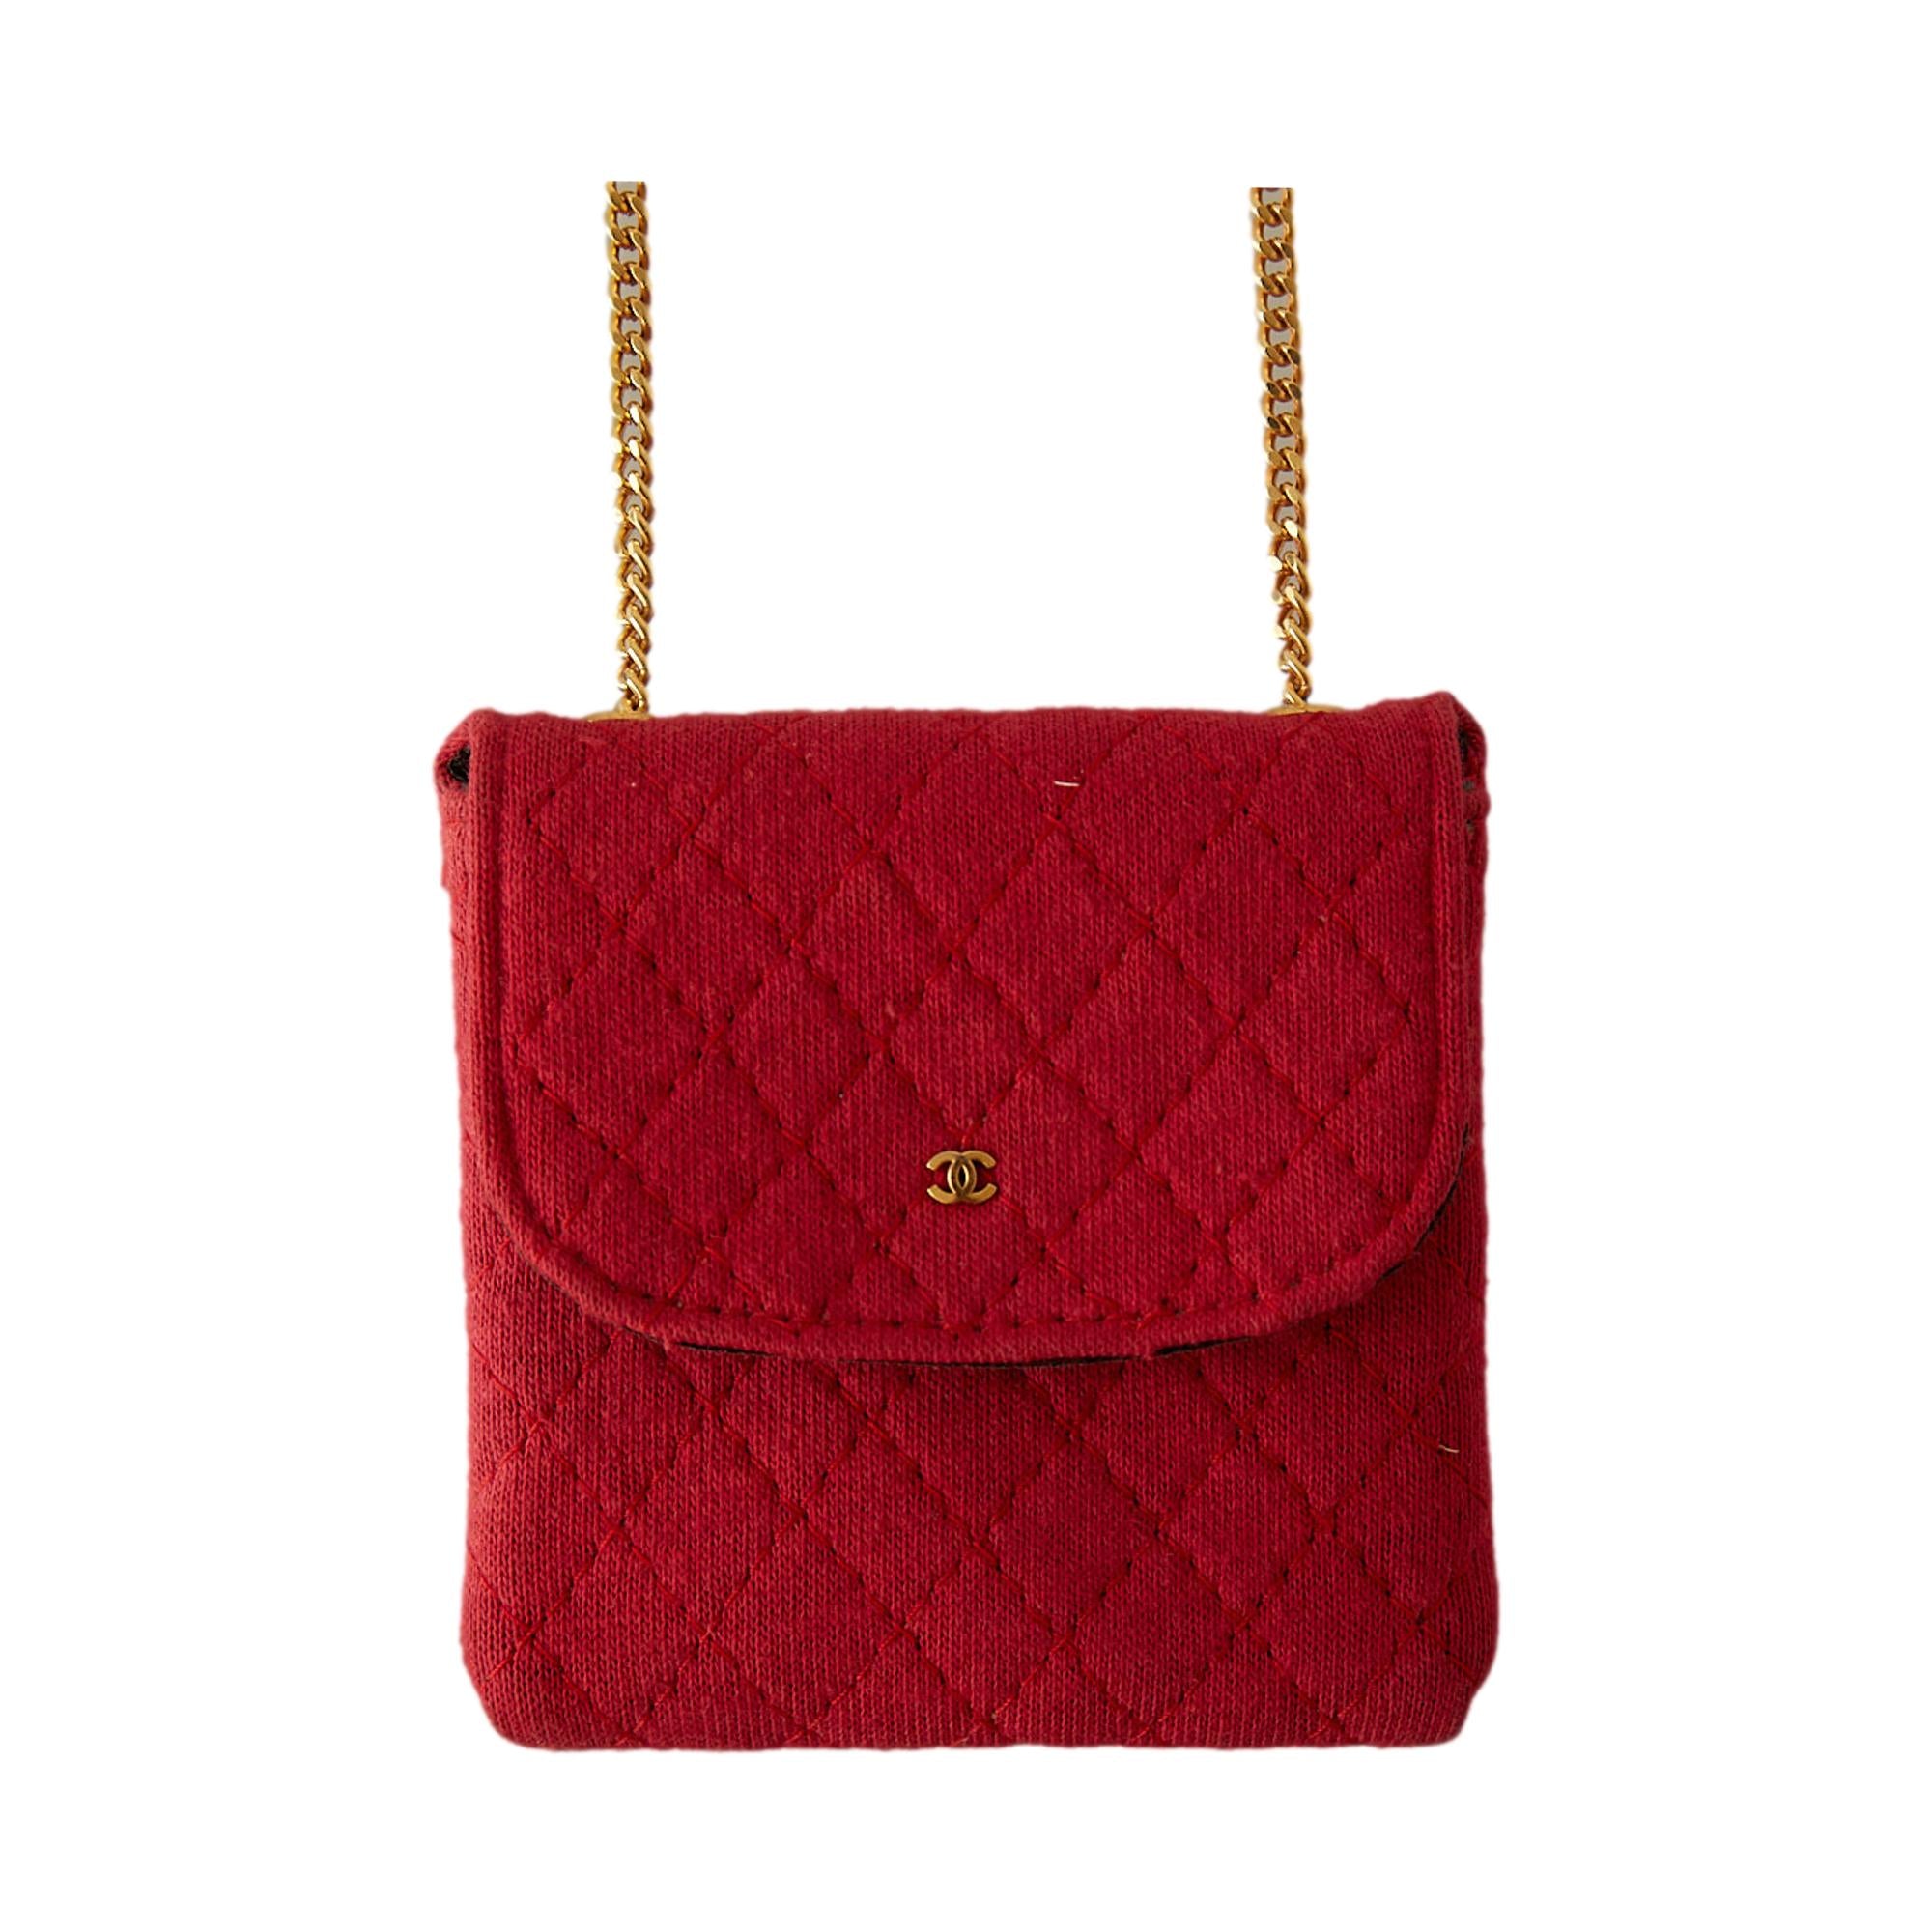 Chanel Red Quilted Micro Bag